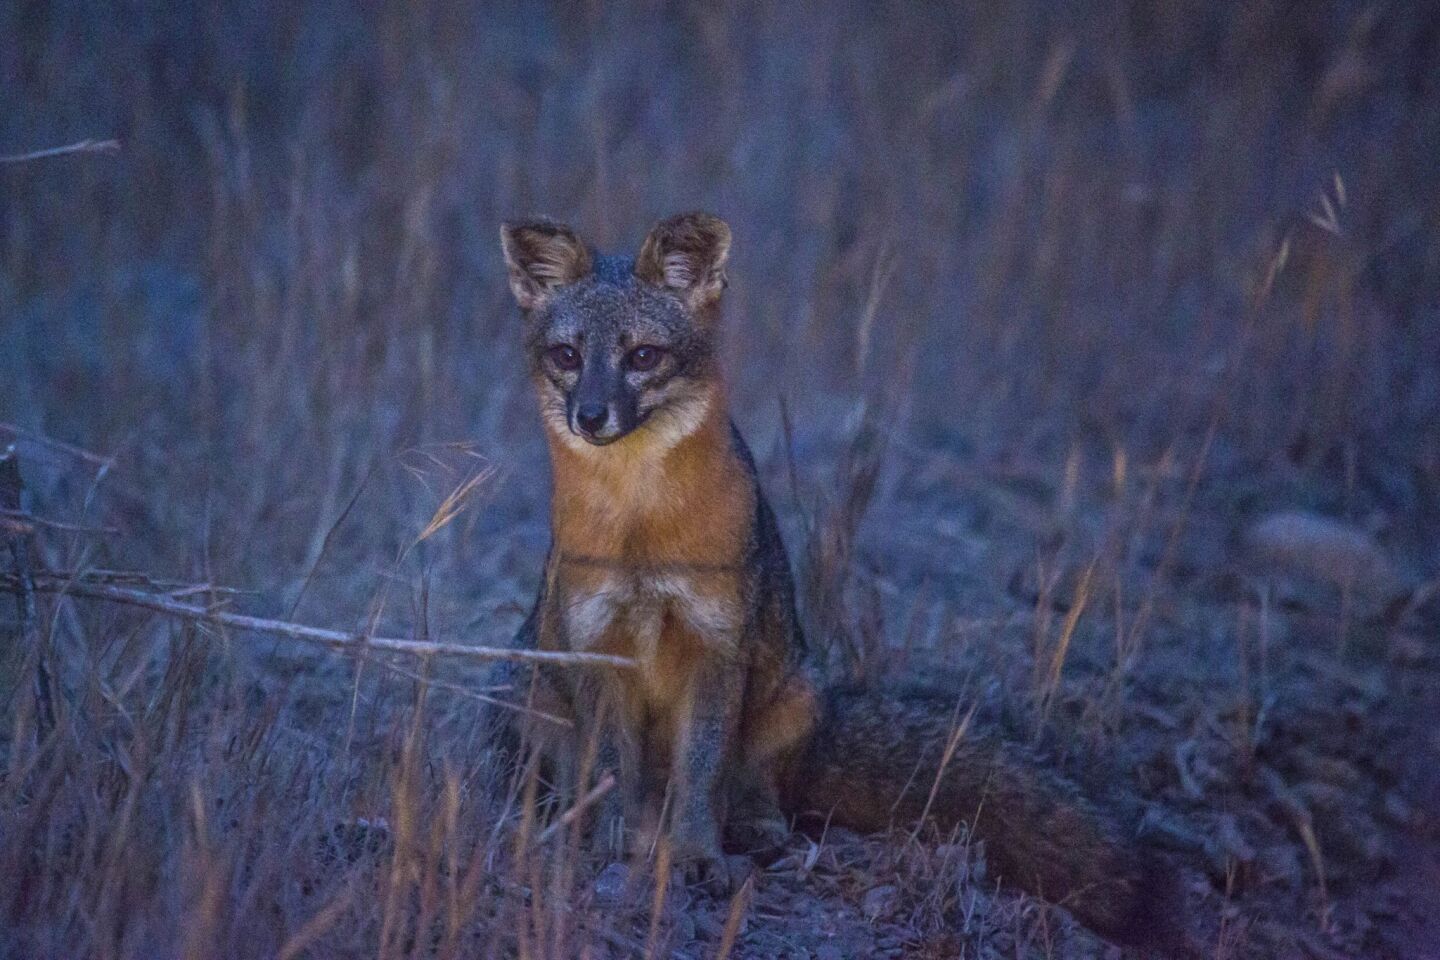 Channel Island foxes